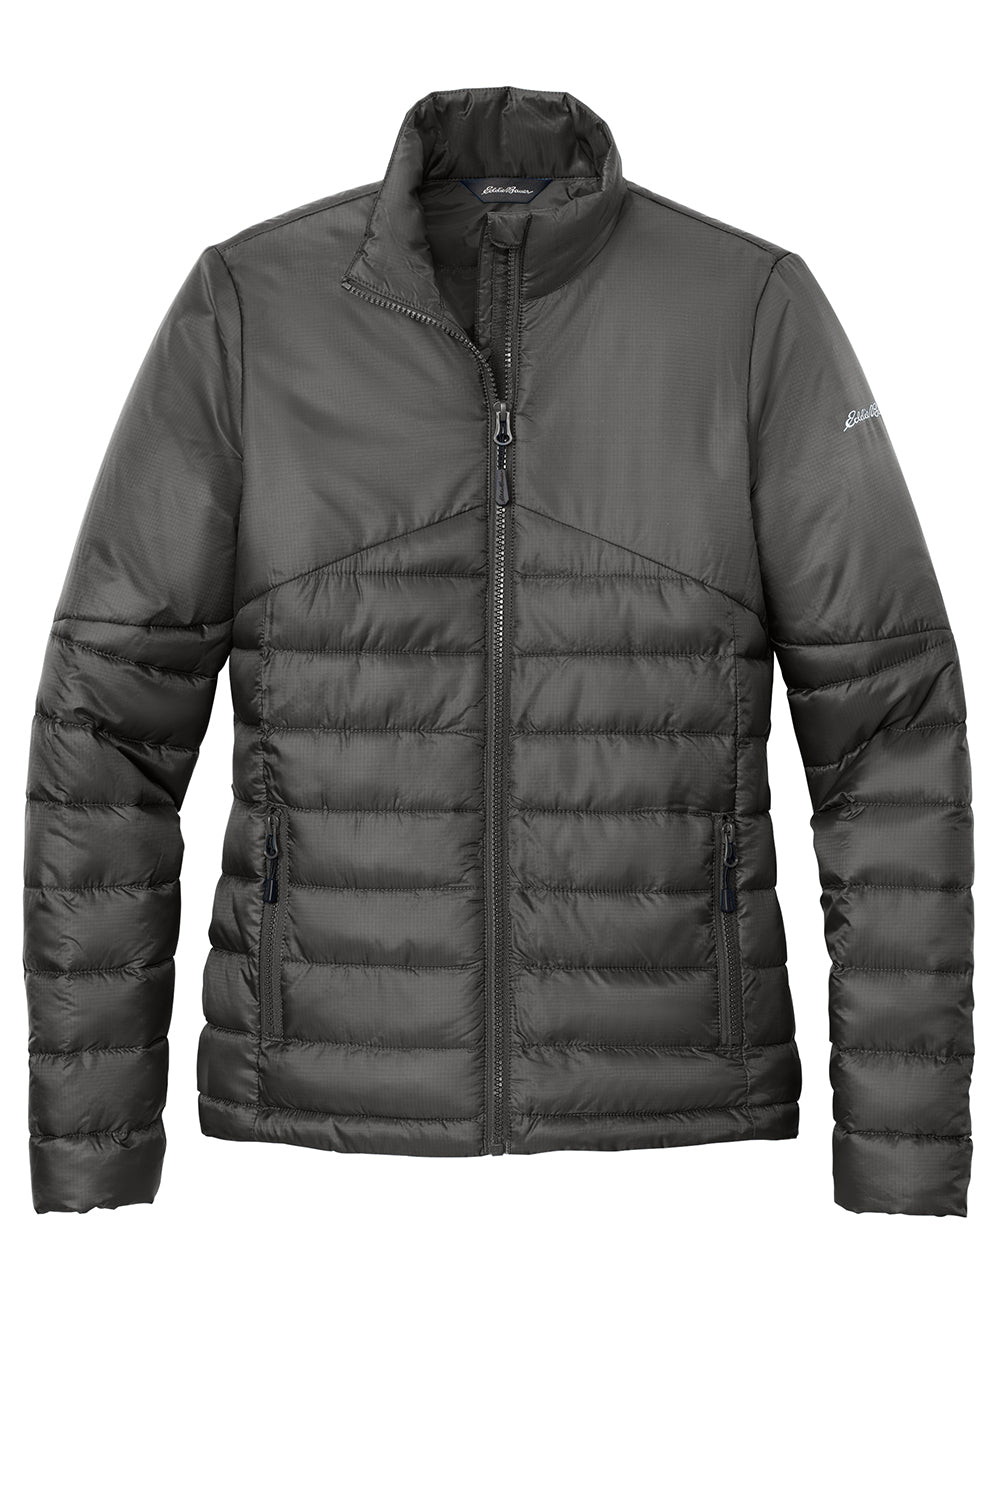 Eddie Bauer EB511 Womens Water Resistant Quilted Full Zip Jacket Iron Gate Grey Flat Front